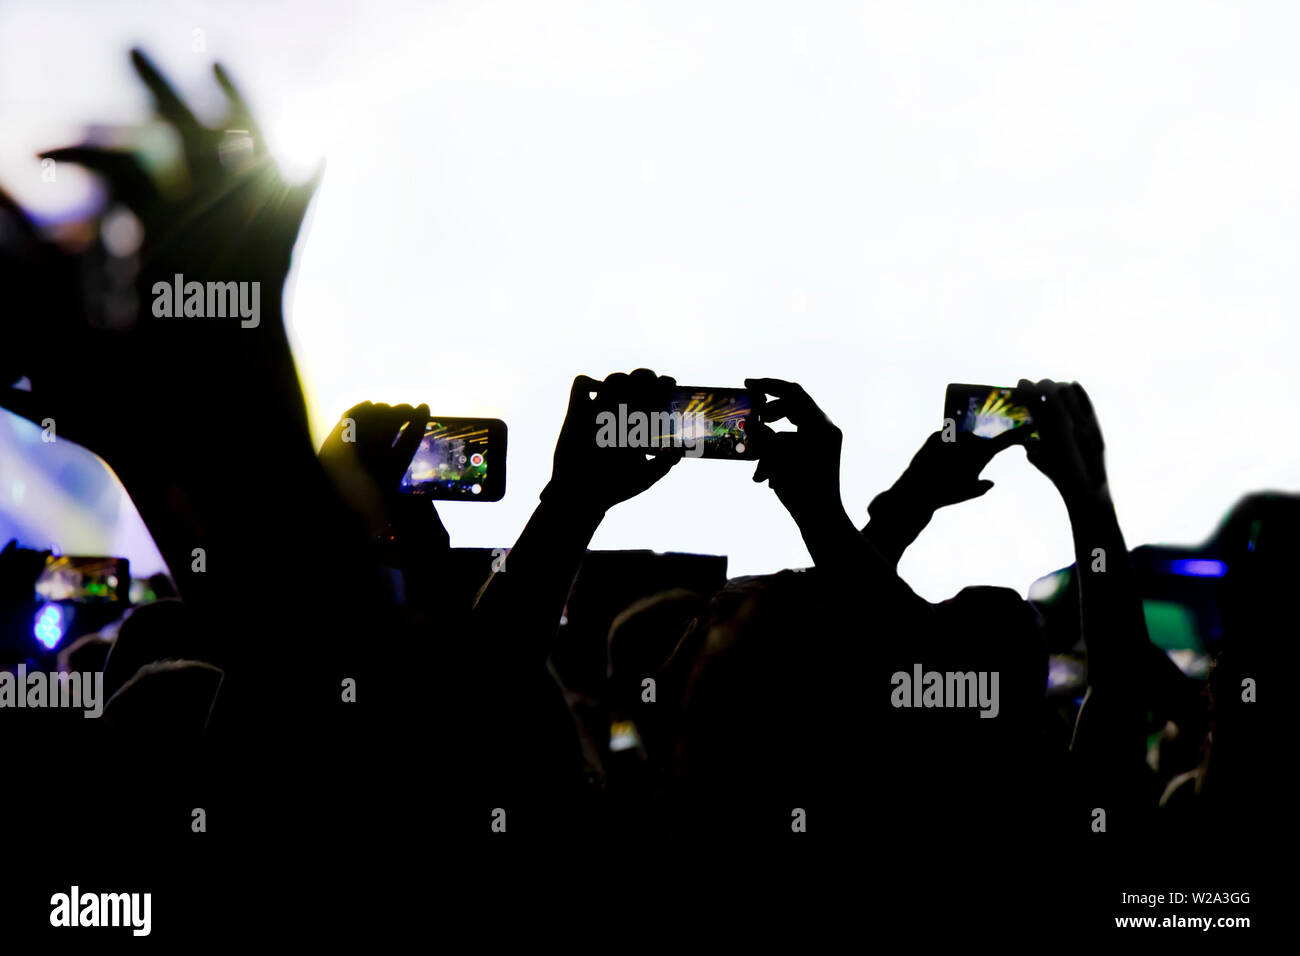 Collecting digital memory is loosing capability of being present, silhouette of people shooting the concert with mobile phones Stock Photo